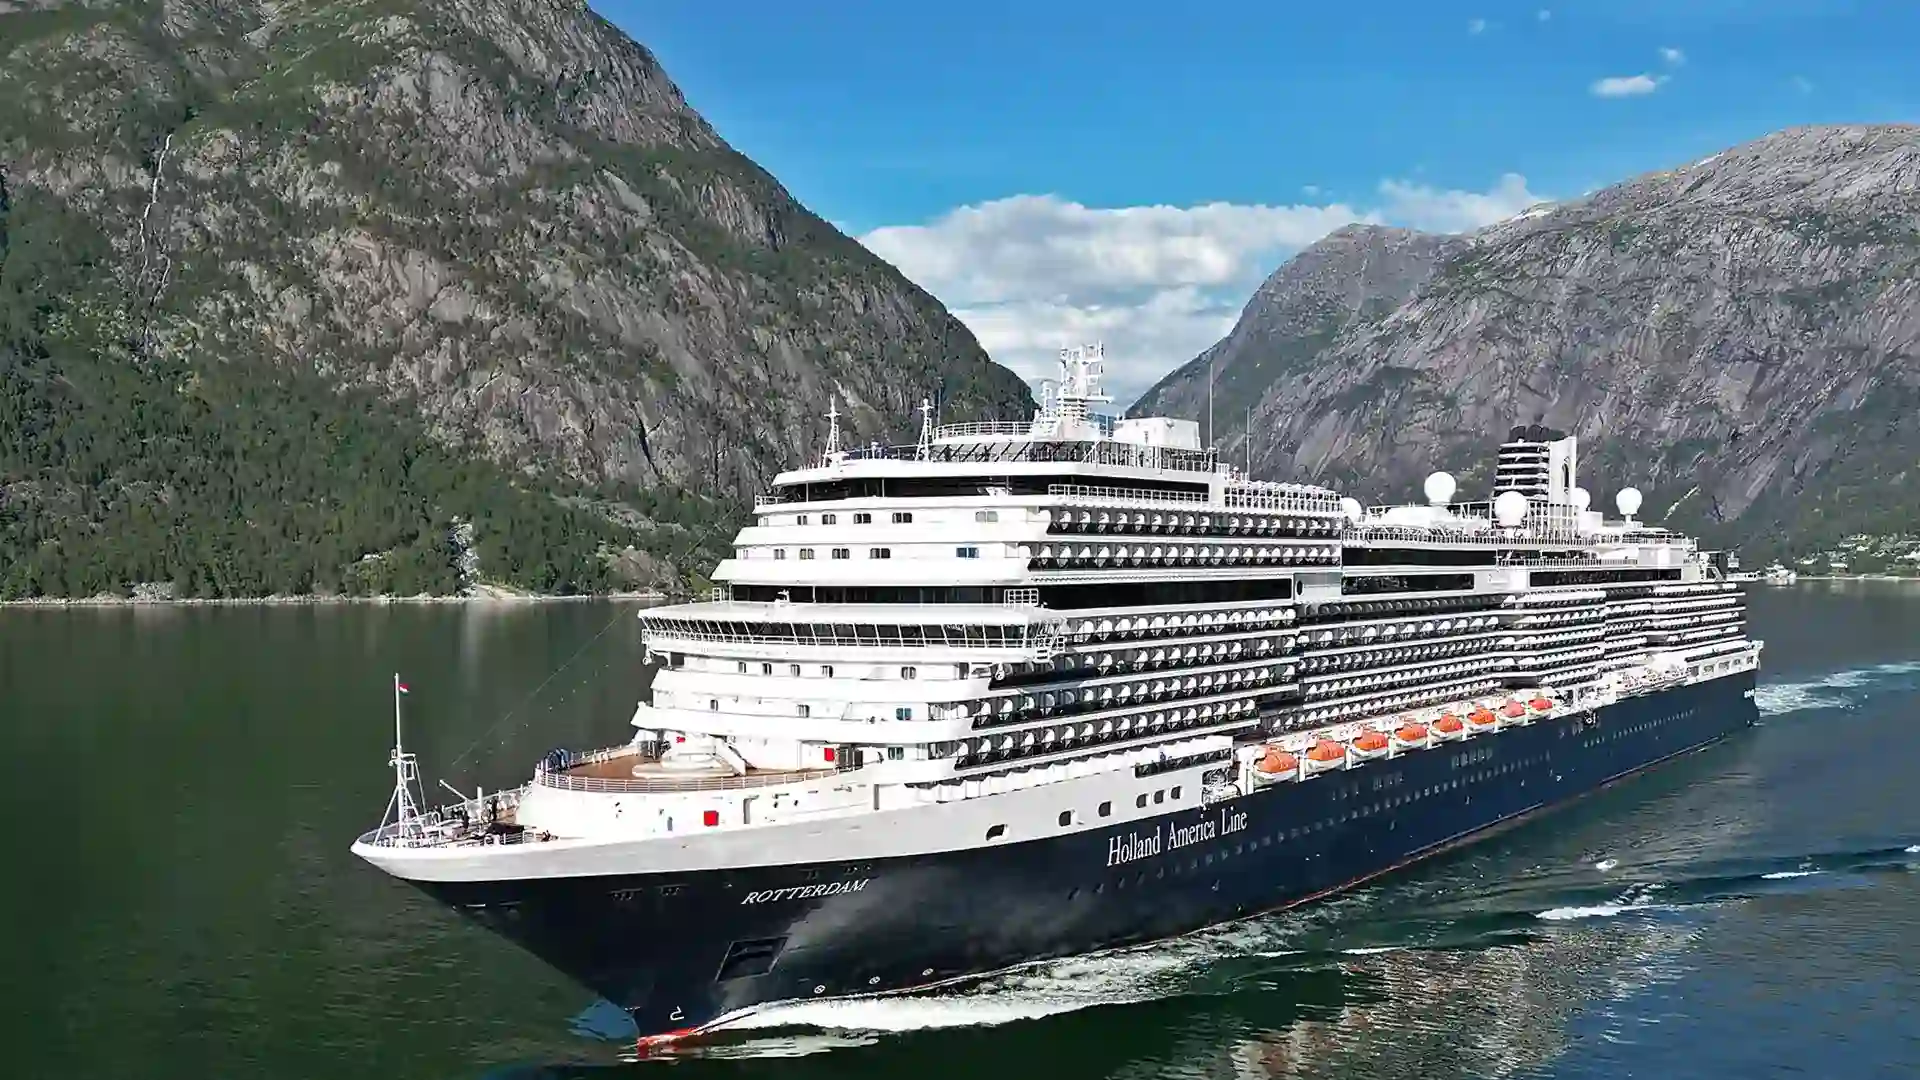 View of Holland America Line cruise ship sailing around fjords.